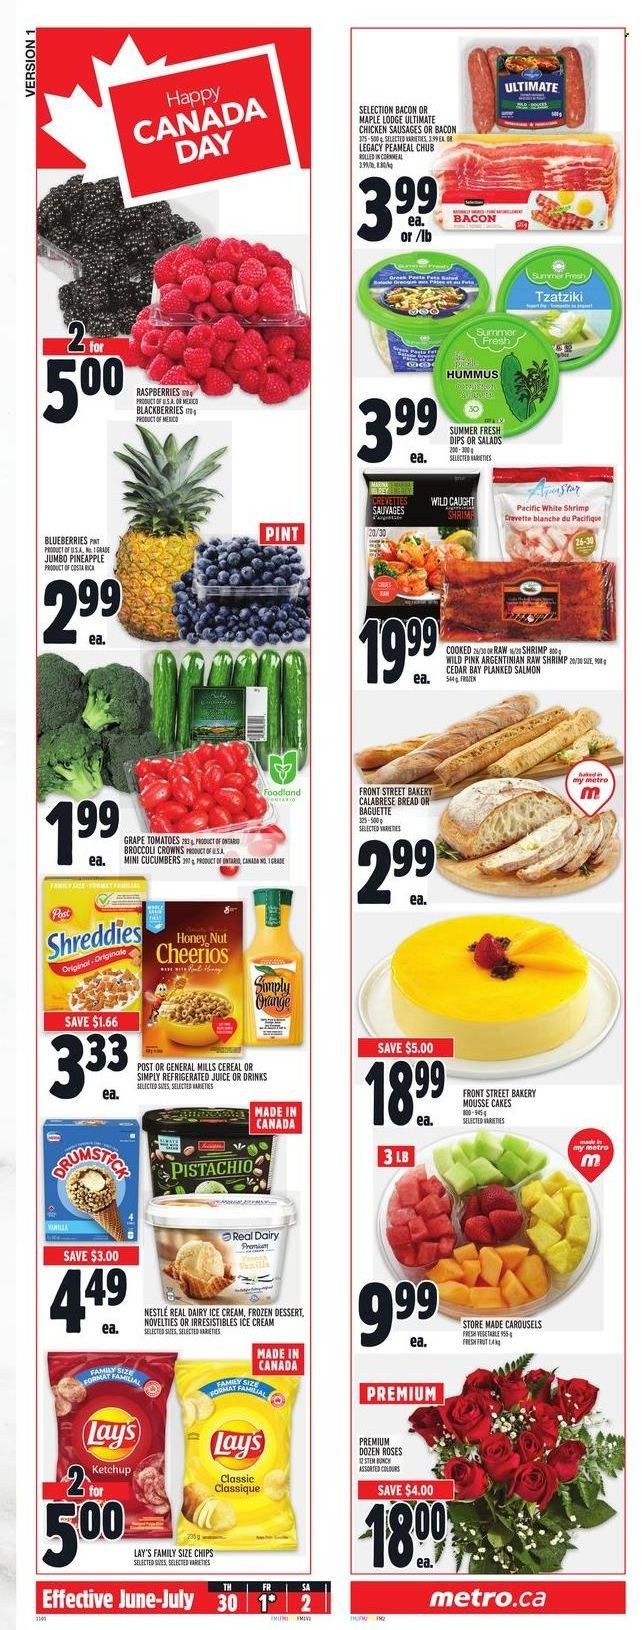 thumbnail - Metro Flyer - June 30, 2022 - July 06, 2022 - Sales products - bread, cake, cucumber, tomatoes, blackberries, blueberries, pineapple, salmon, shrimps, pasta, bacon, sausage, tzatziki, hummus, ice cream, Lay’s, cereals, Cheerios, juice, rose, baguette, Nestlé, ketchup. Page 14.